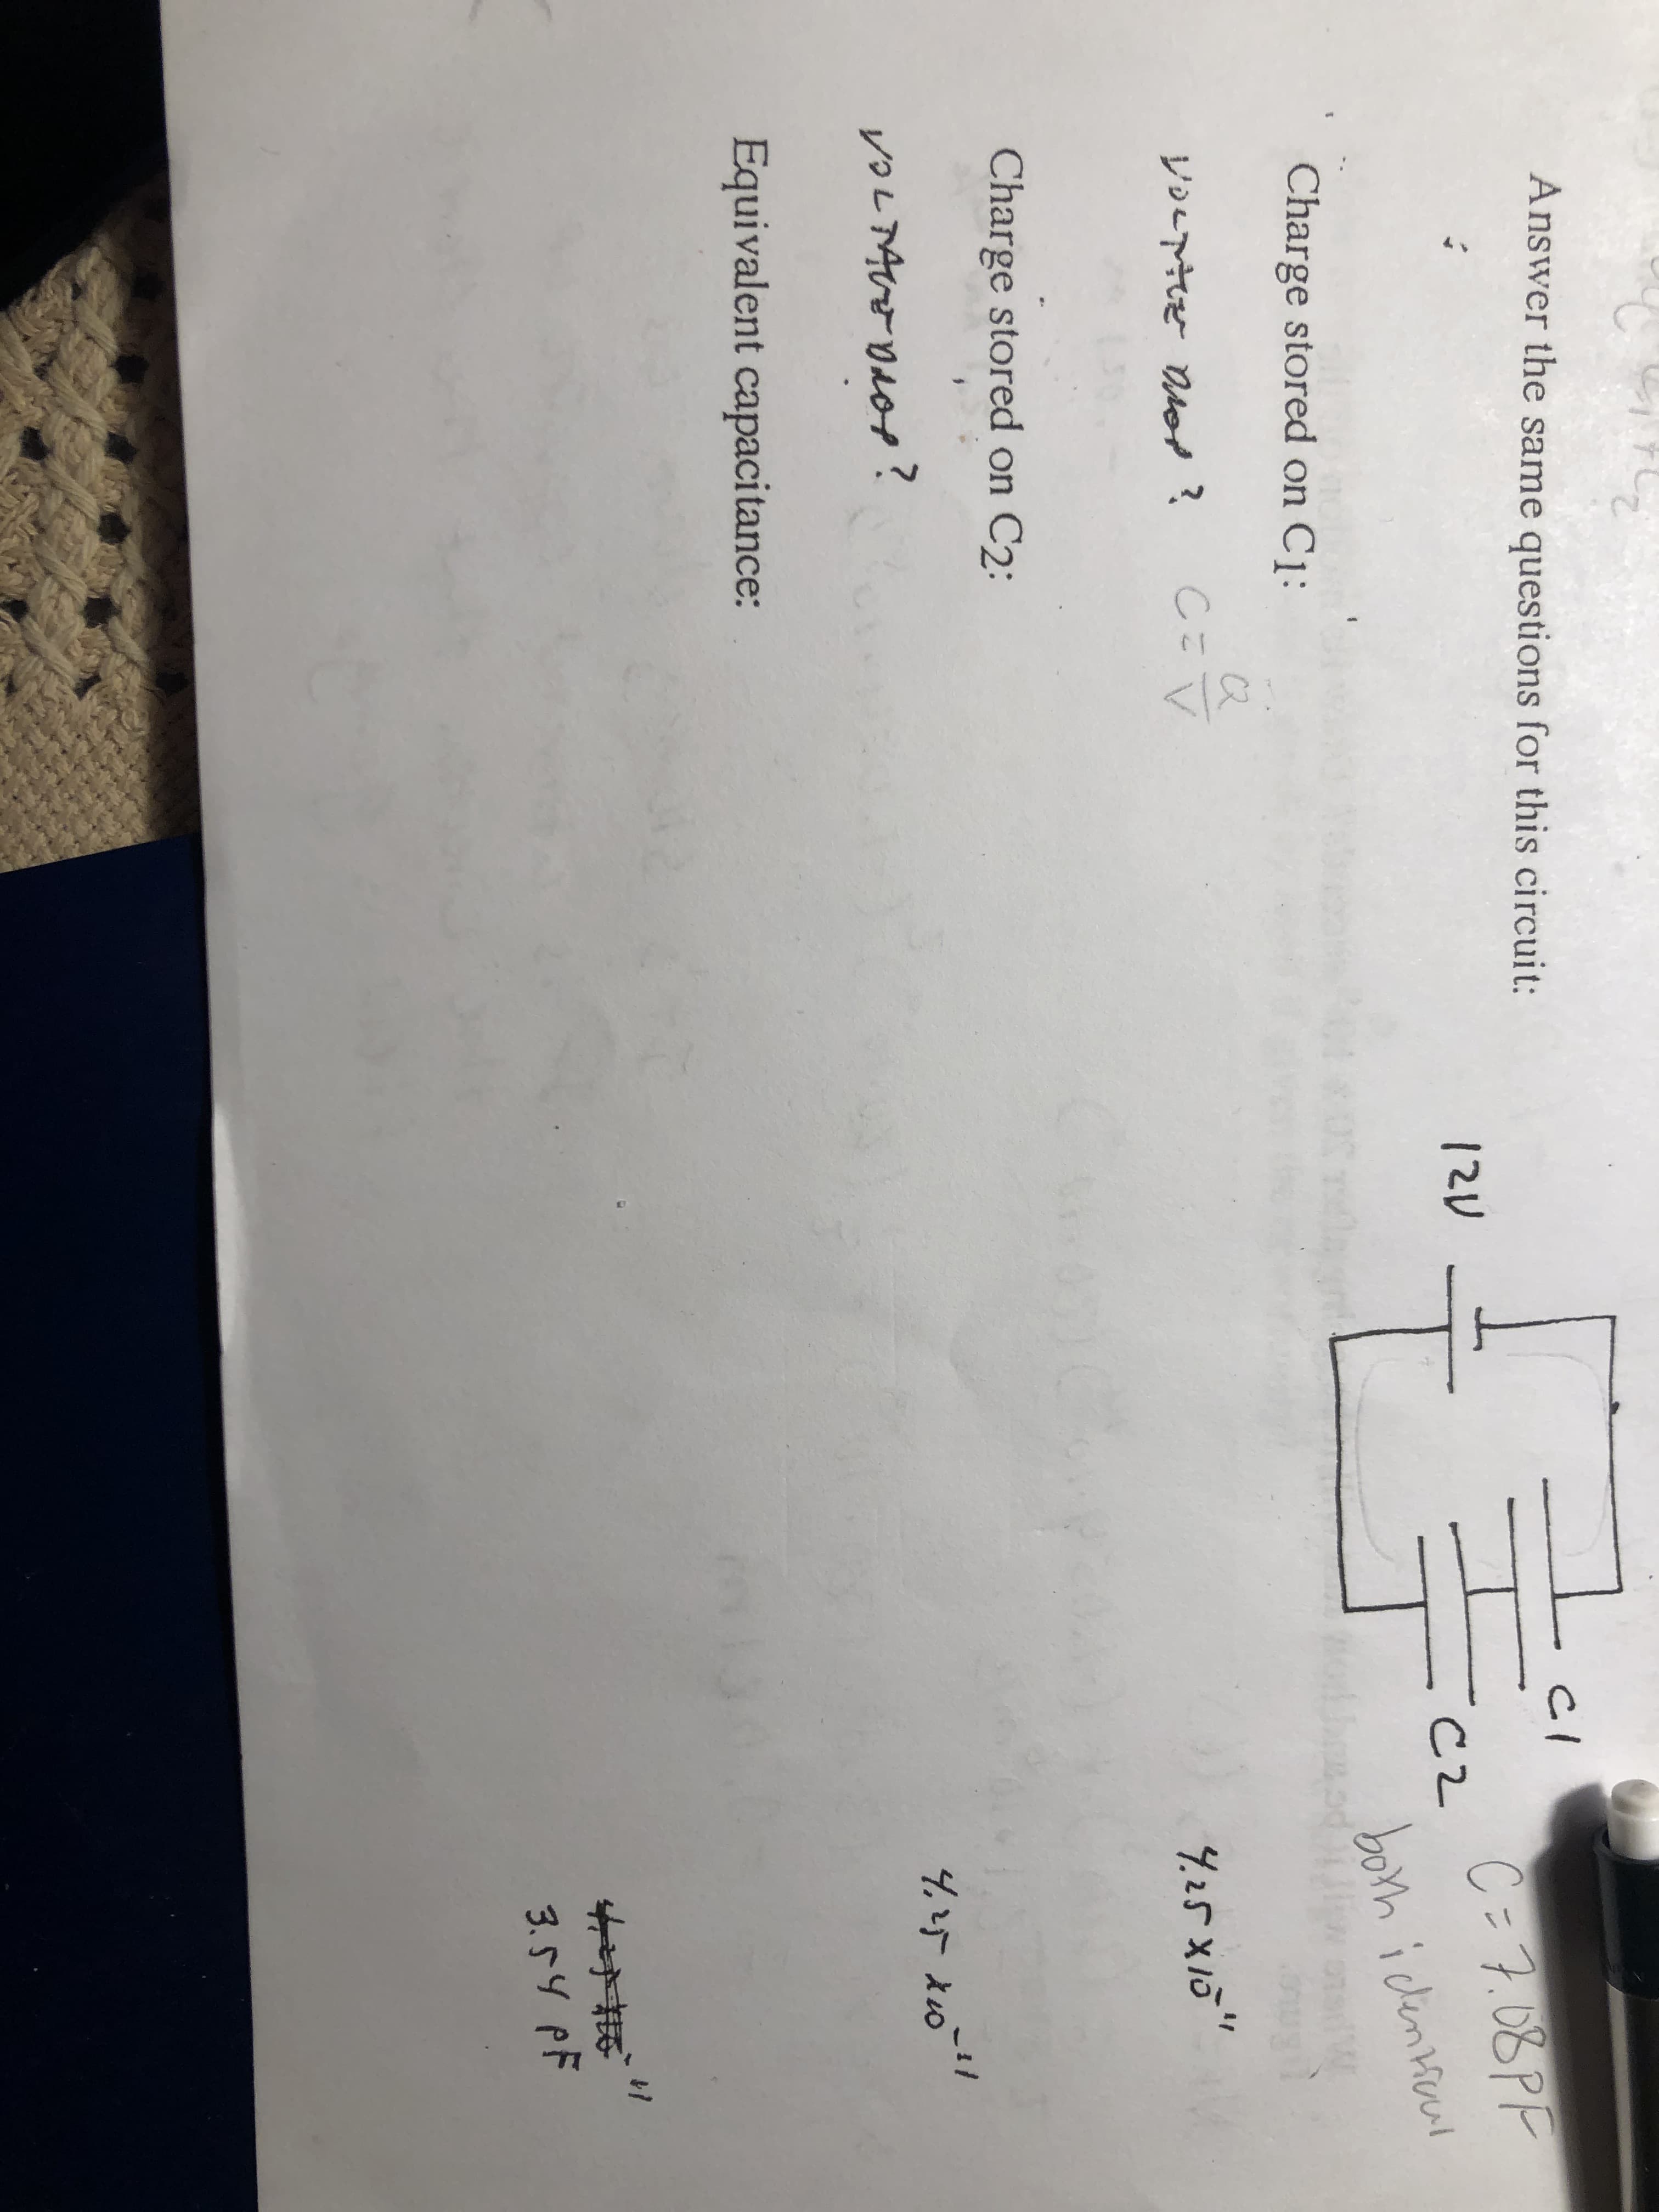 Answer the same questions for this circuit:
12U
C =7.08PF
Charge stored on C1:
both i denticul
Vocpte Dot?
Y,25x10
Charge stored on C2:
VOLTAVO DAos
Equivalent capacitance:
3. S4 pF
